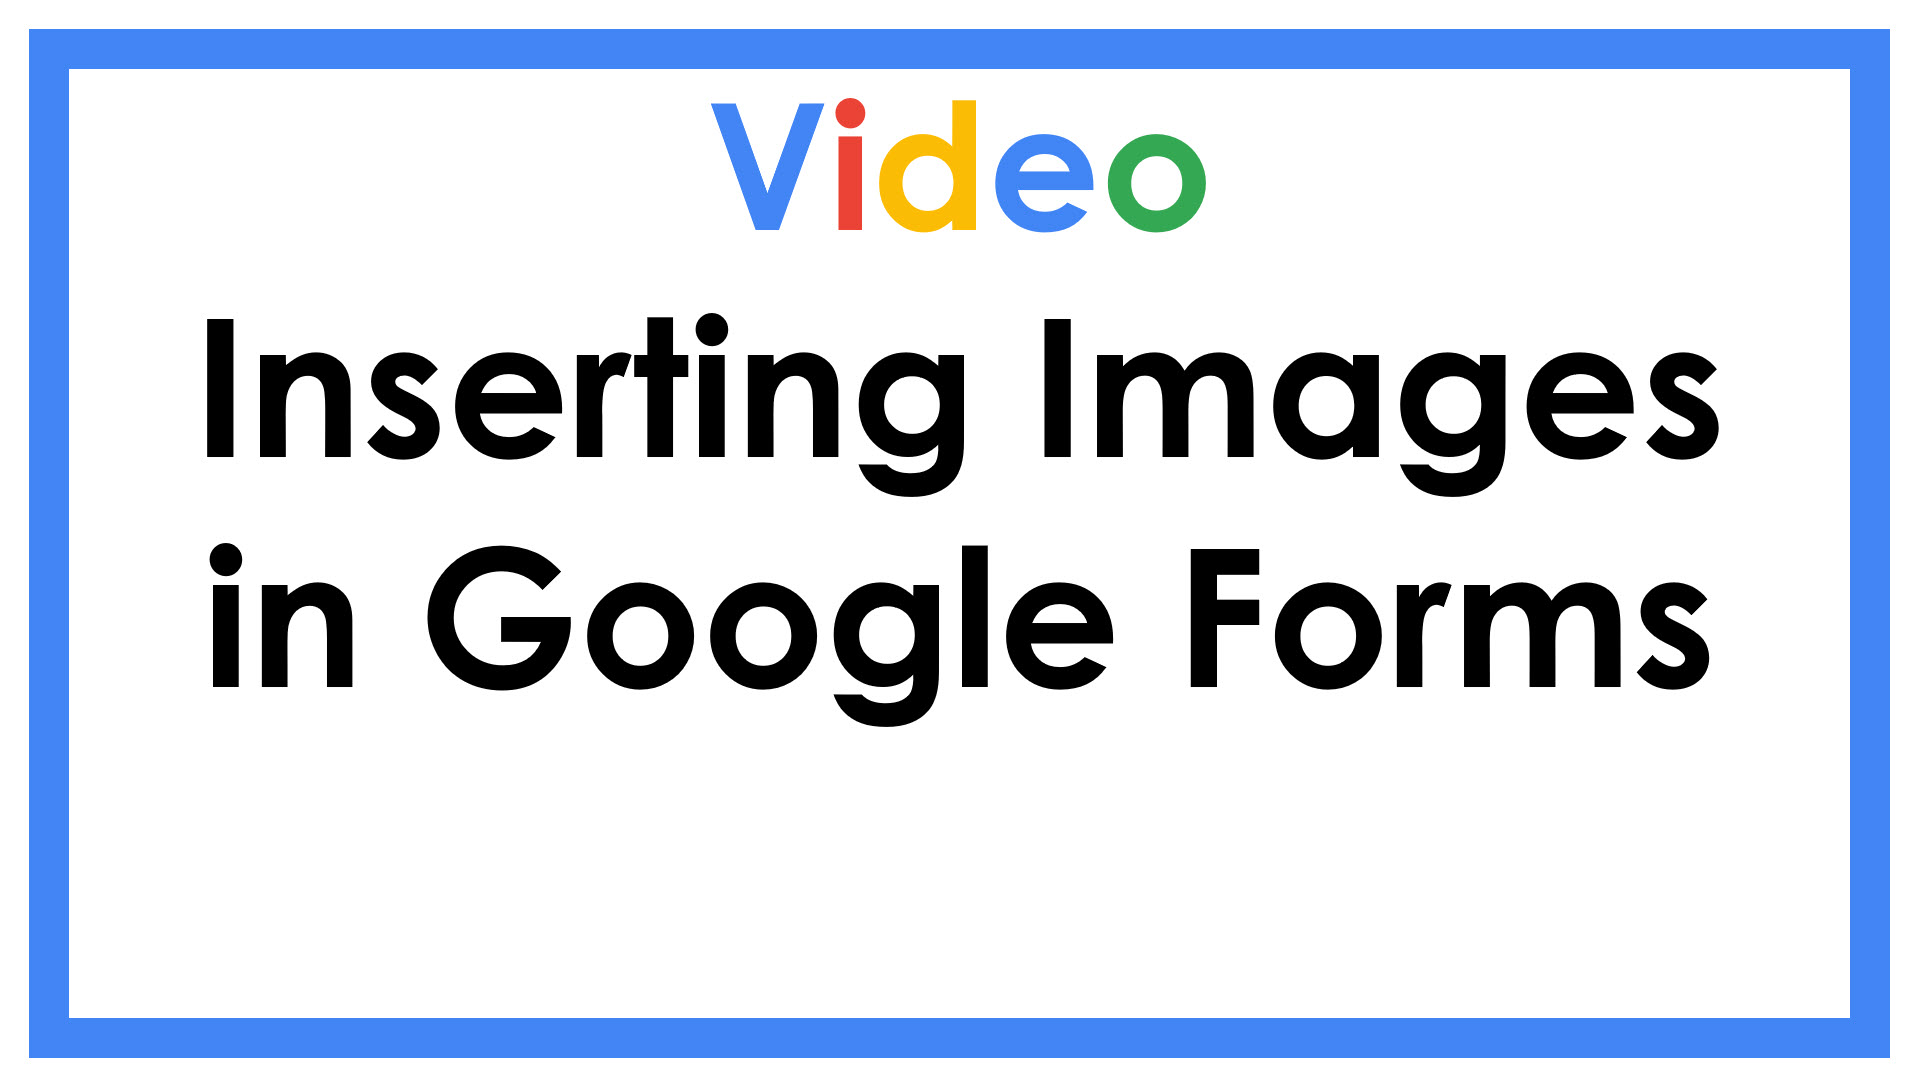 Inserting Images in Google Forms